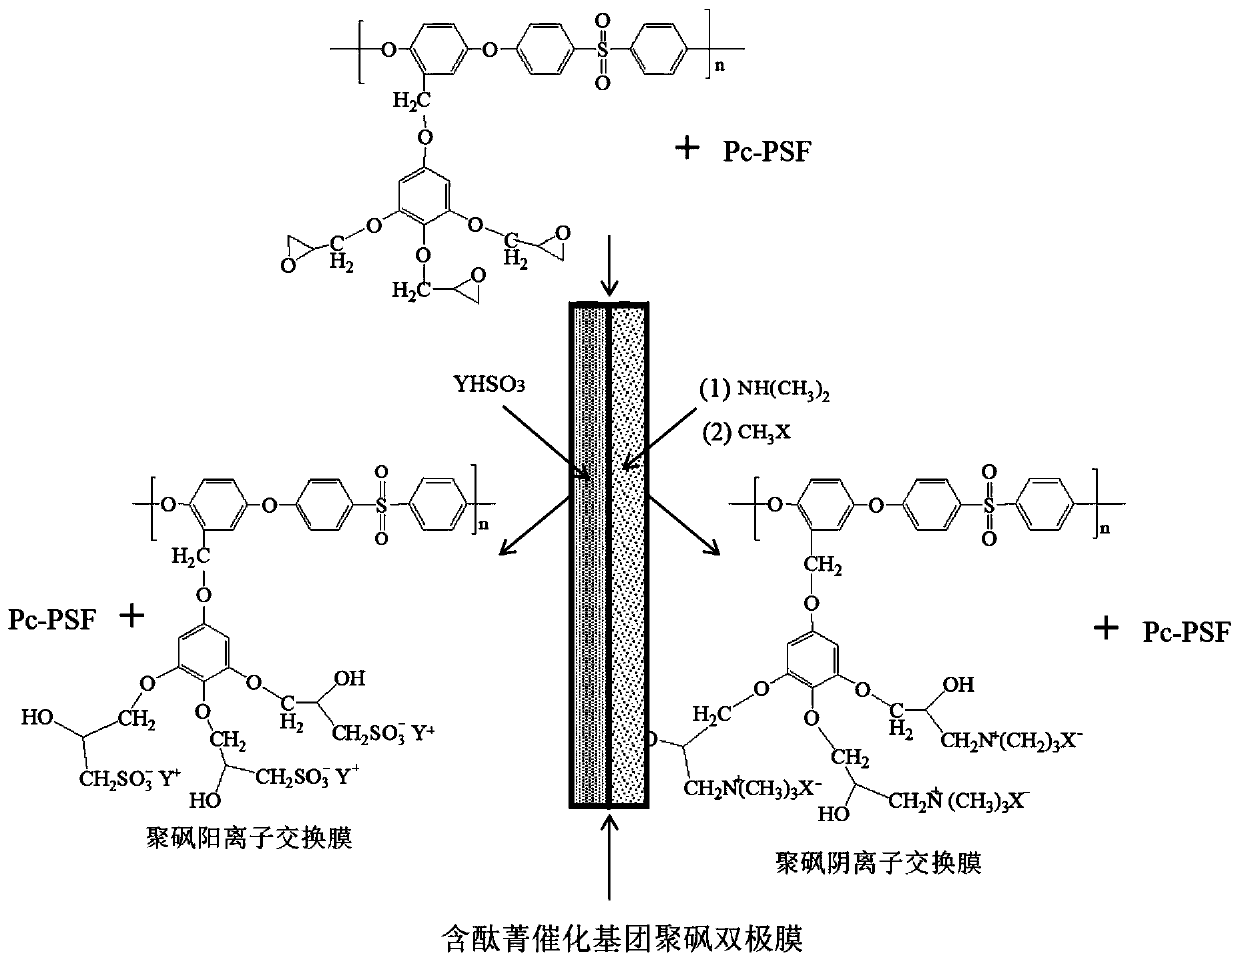 Preparation method of monolithic polysulfone bipolar membrane with side group bonded with phthalocyanine catalytic group